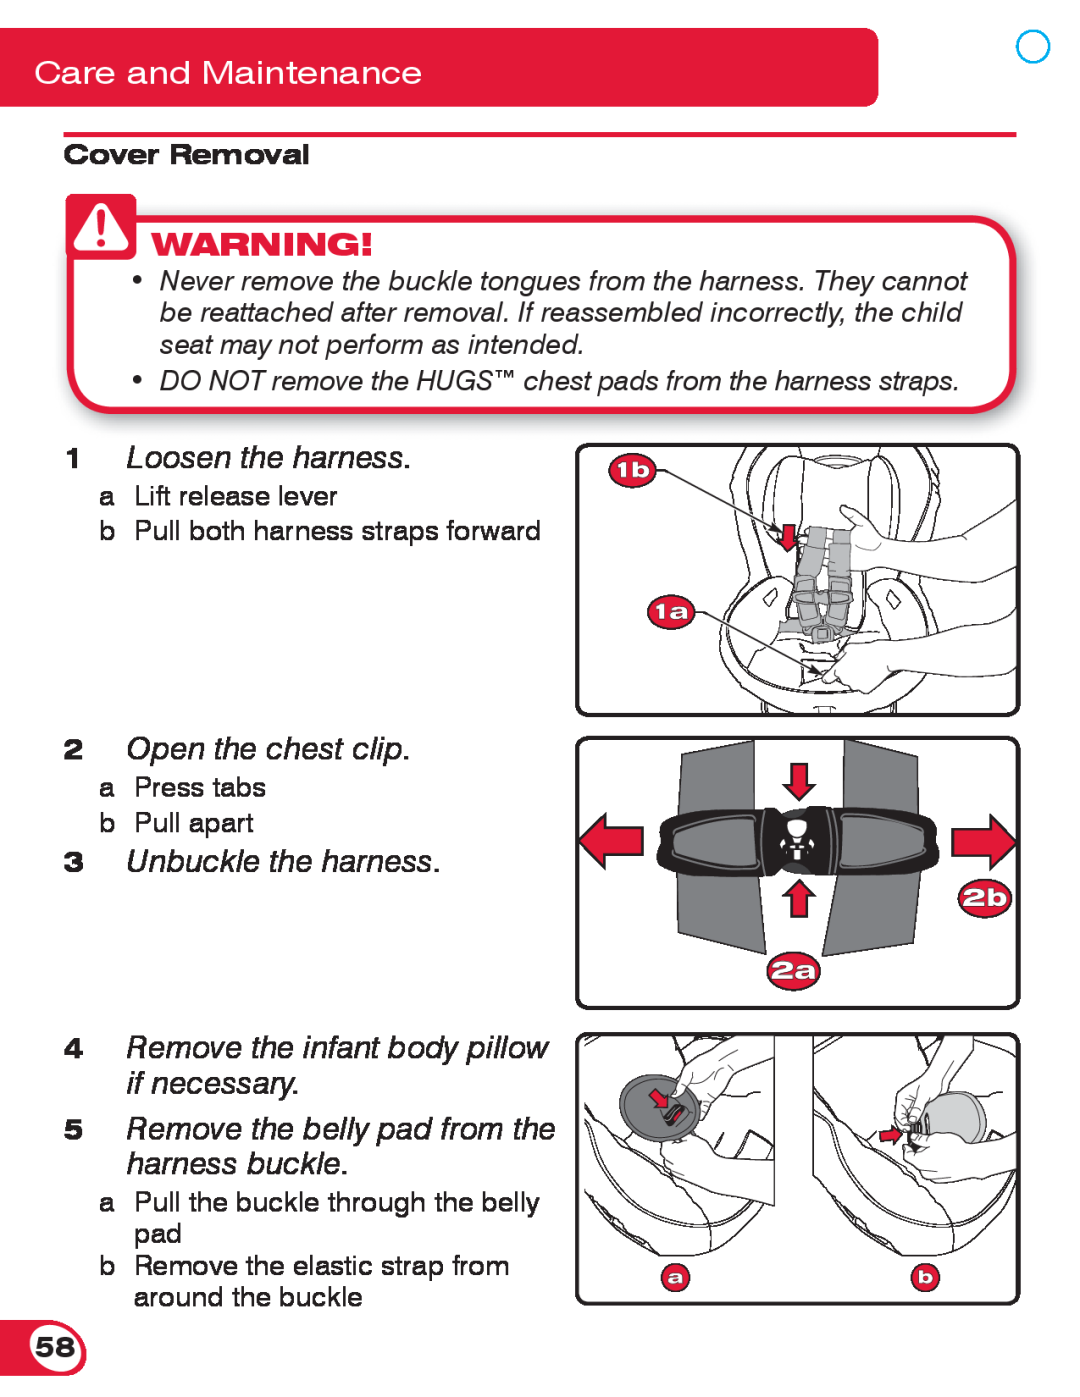 Britax 70 CS manual Care and Maintenance, Loosen the harness, Cover Removal 